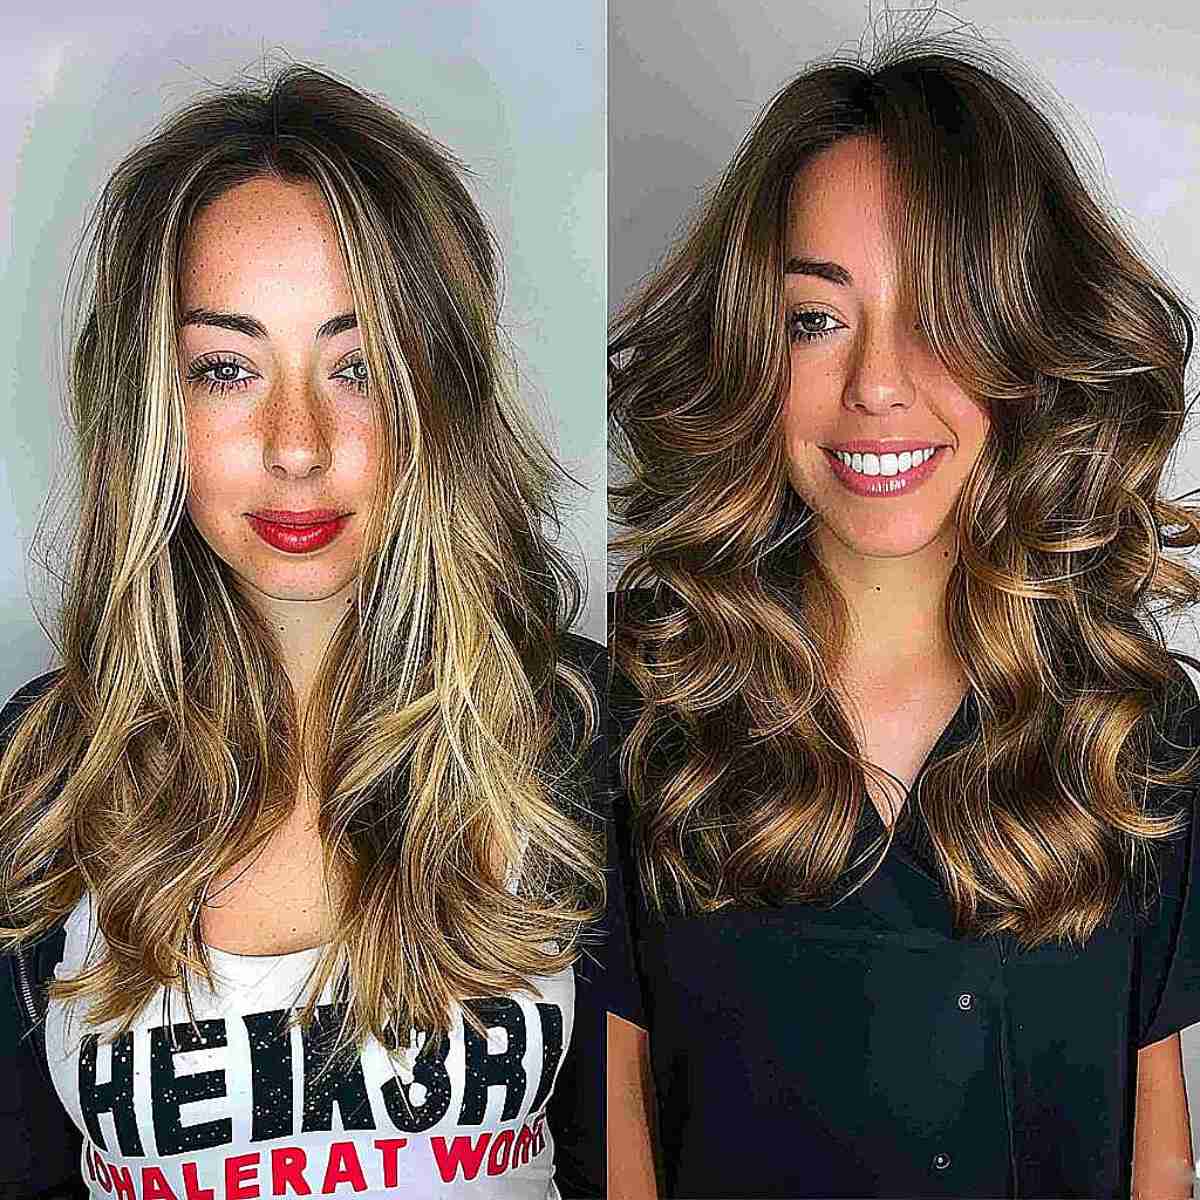 Medium length chocolate brown hair transformed from straight with light ends to voluminous curls, illustrating a versatile styling option for wavy to curly textures.